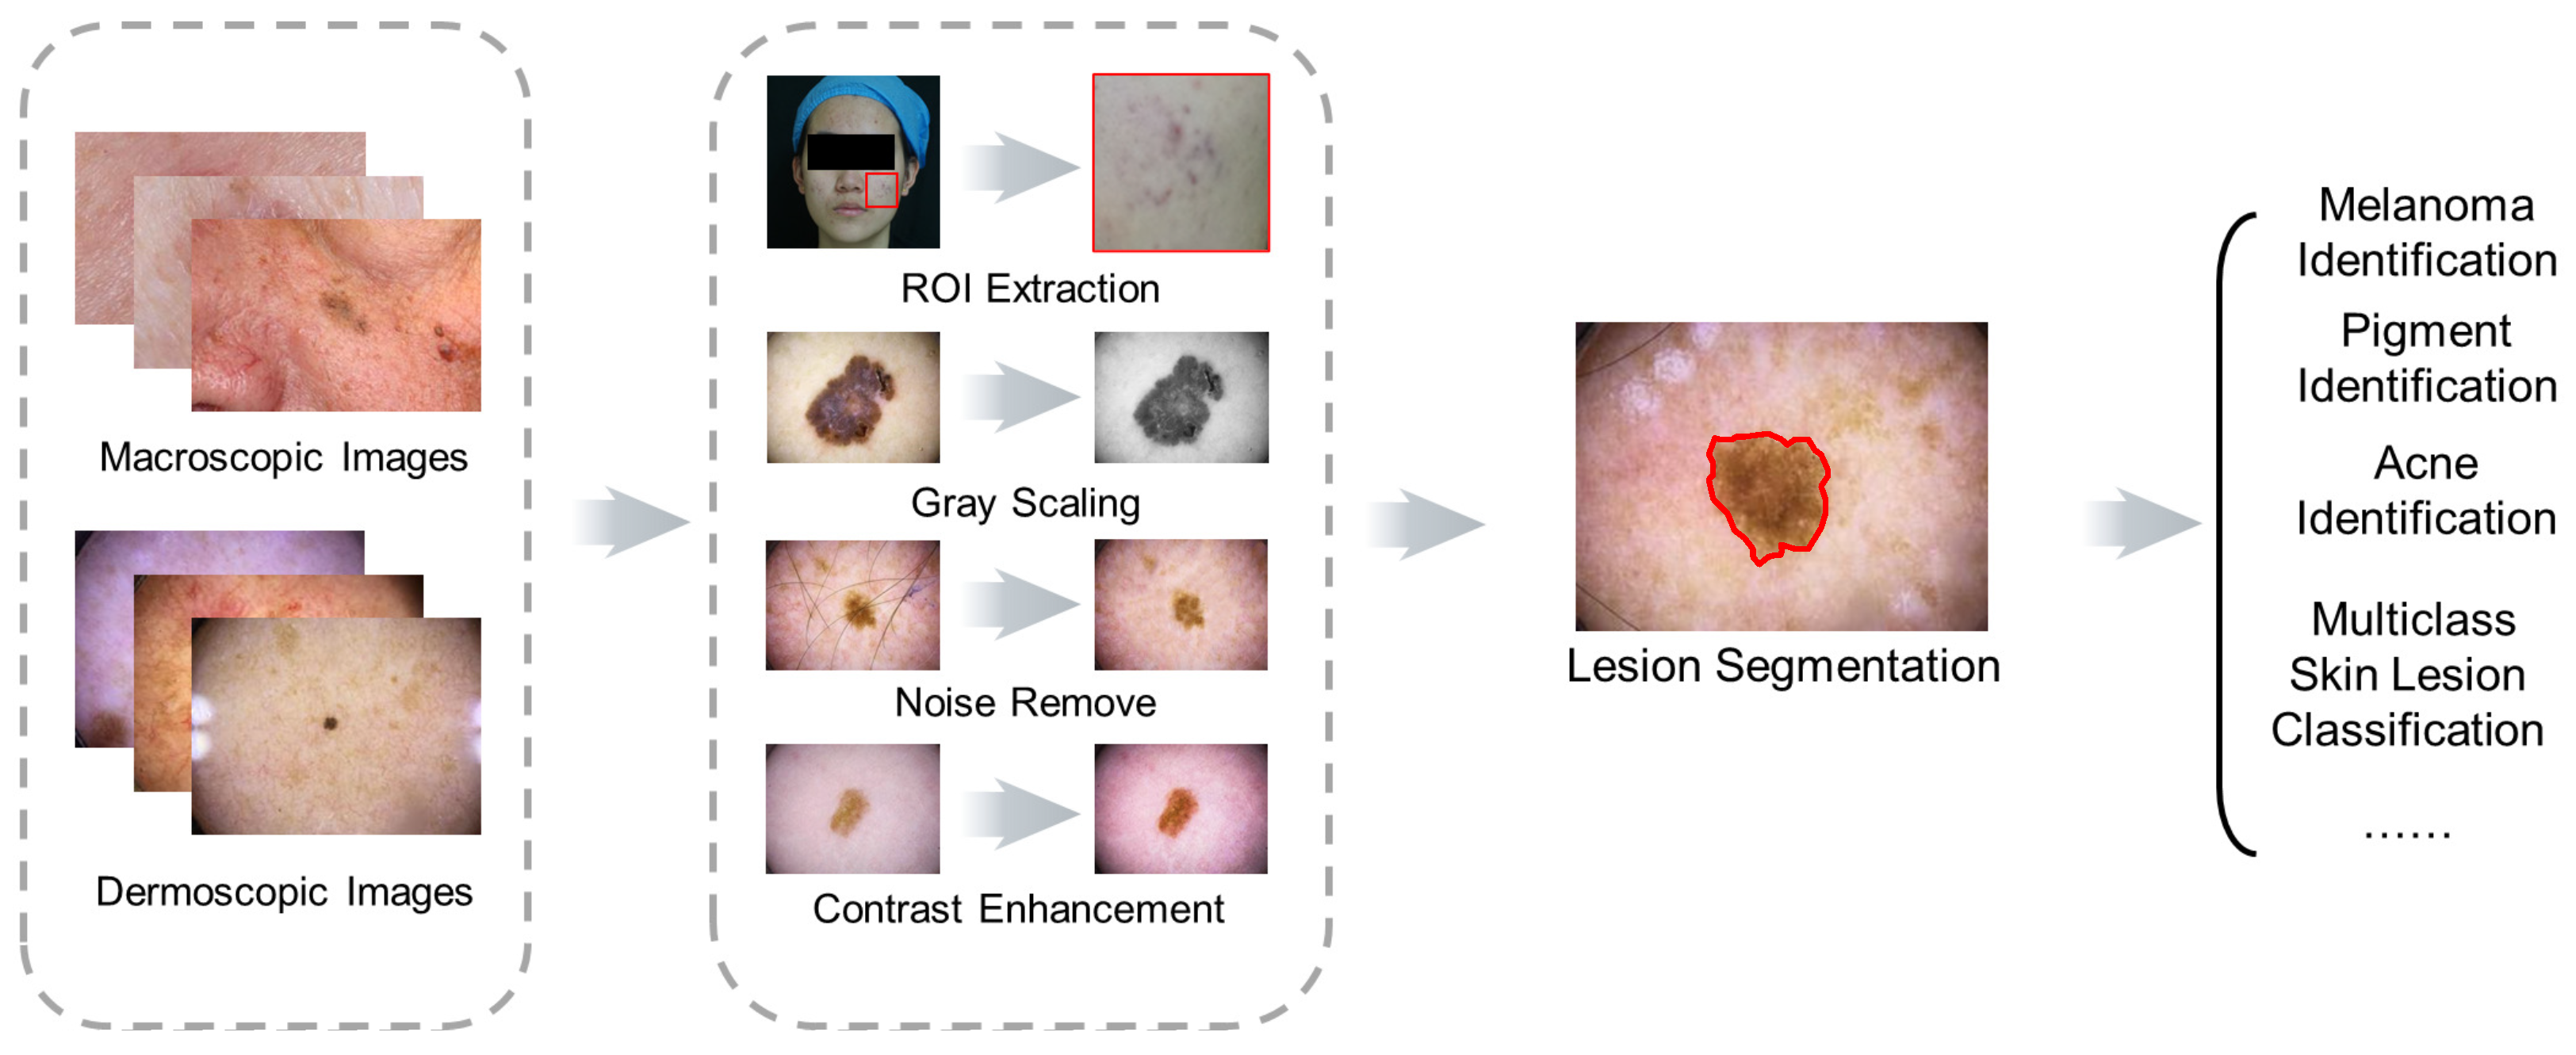 research paper on skin diseases using machine learning